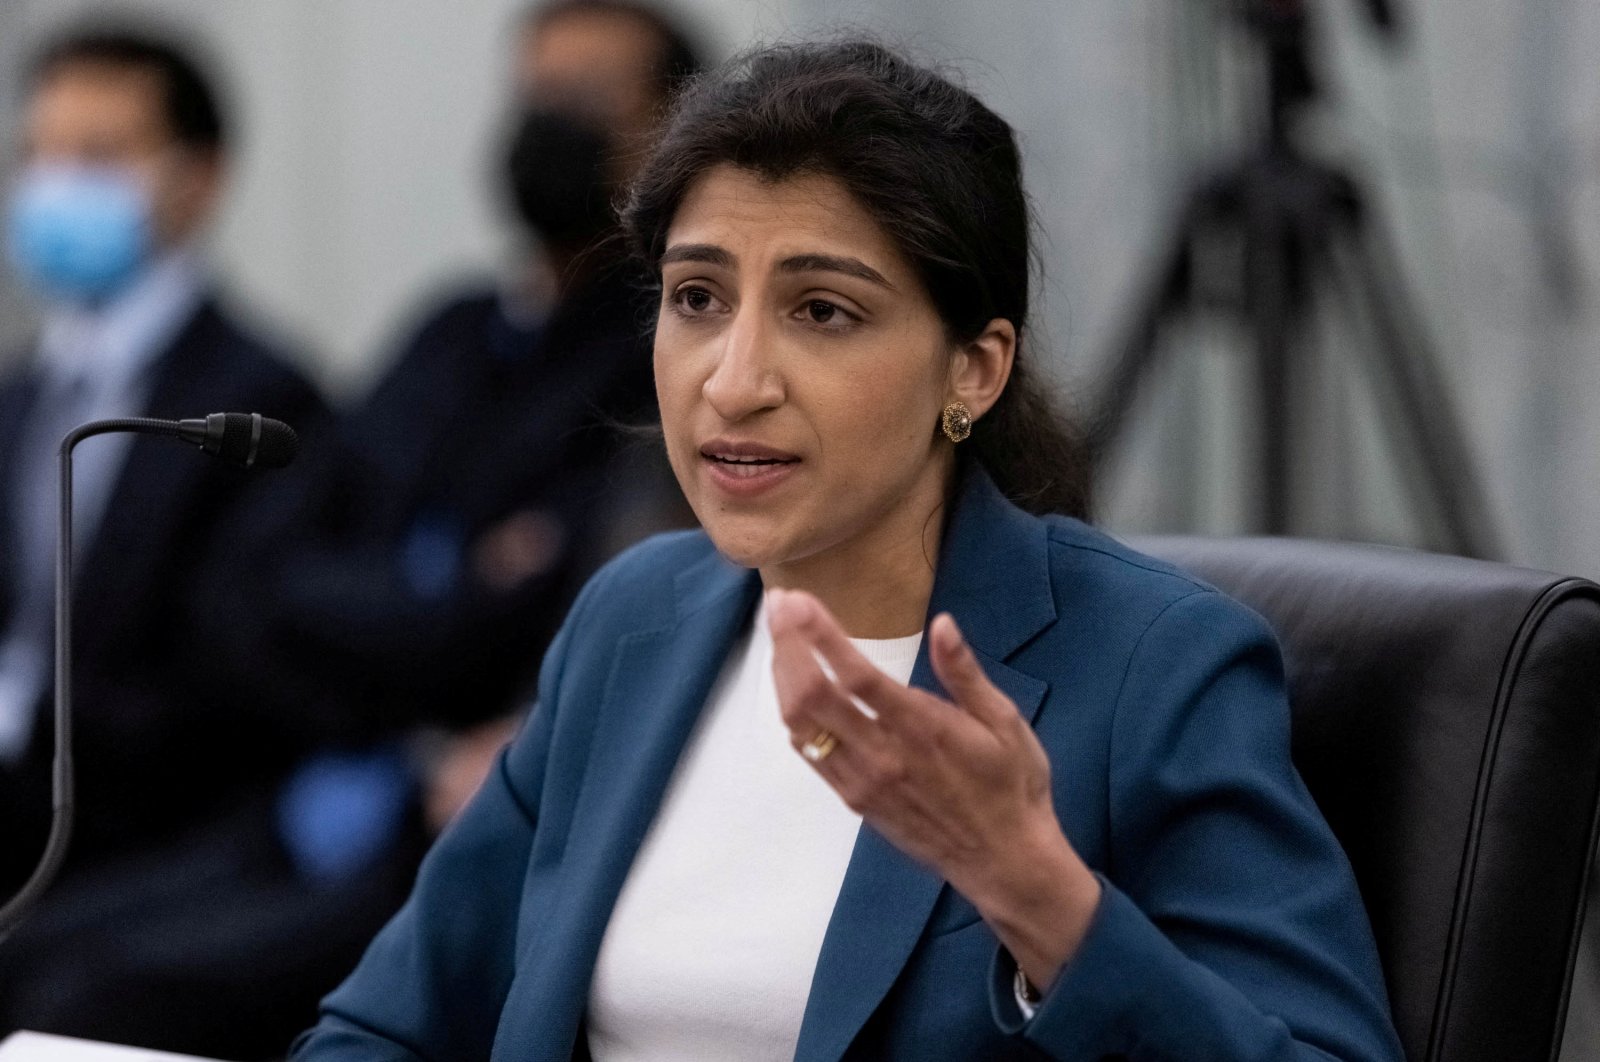 Lina Khan, a nominee for commissioner of the Federal Trade Commission, speaks during a Senate Committee on Commerce, Science, and Transportation confirmation hearing on Capitol Hill in Washington, D.C., U.S., April 21, 2021. (Reuters Photo)